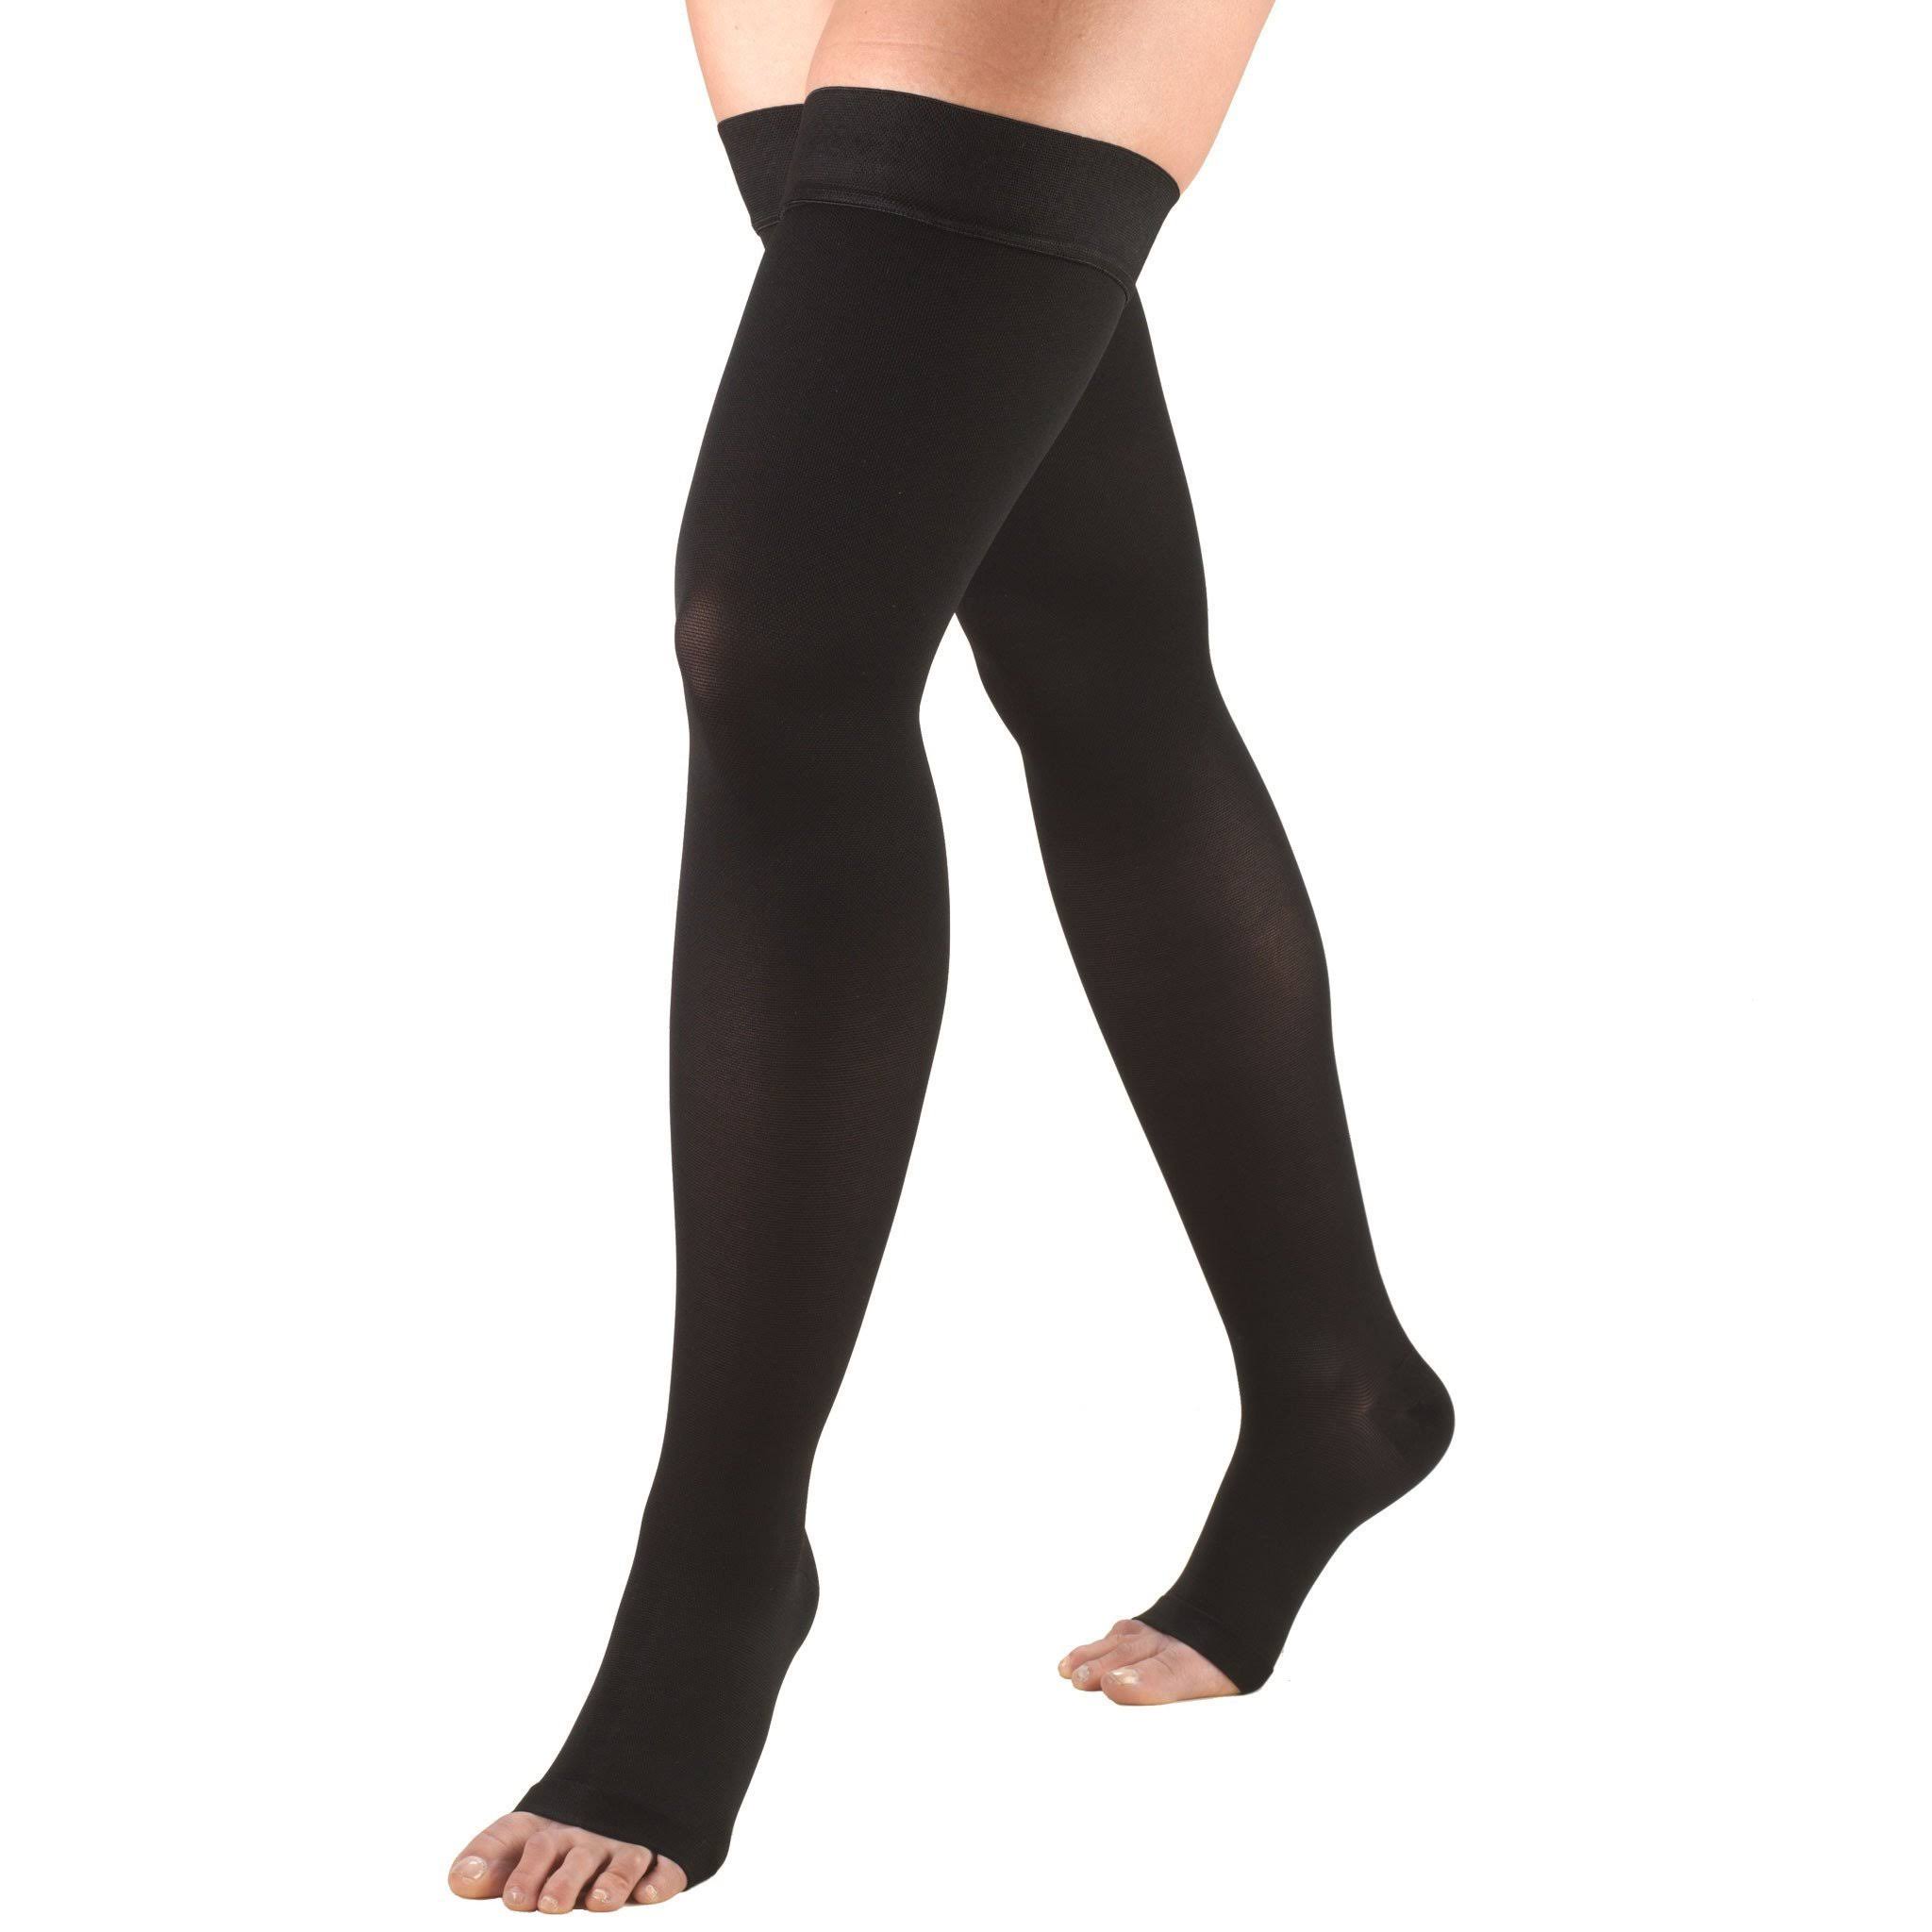 Truform Open Toe Thigh High Compression Stockings - Black, Large, 20-30 mmHg